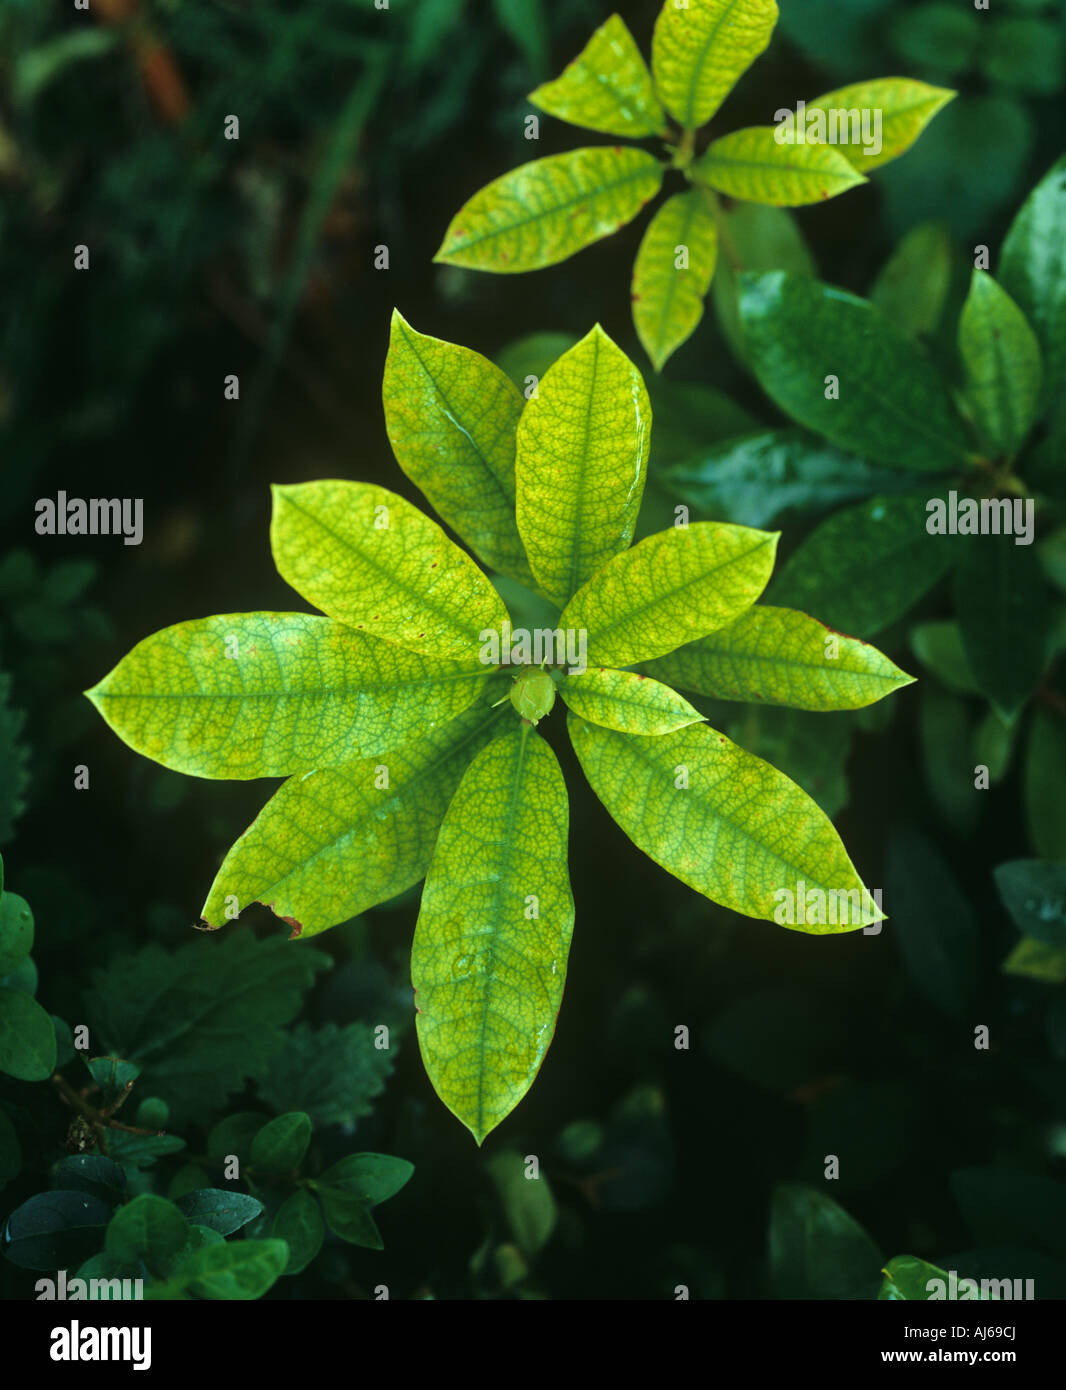 Lime induced iron Fe deficiency in a Rhdodendron plants leaves Stock Photo